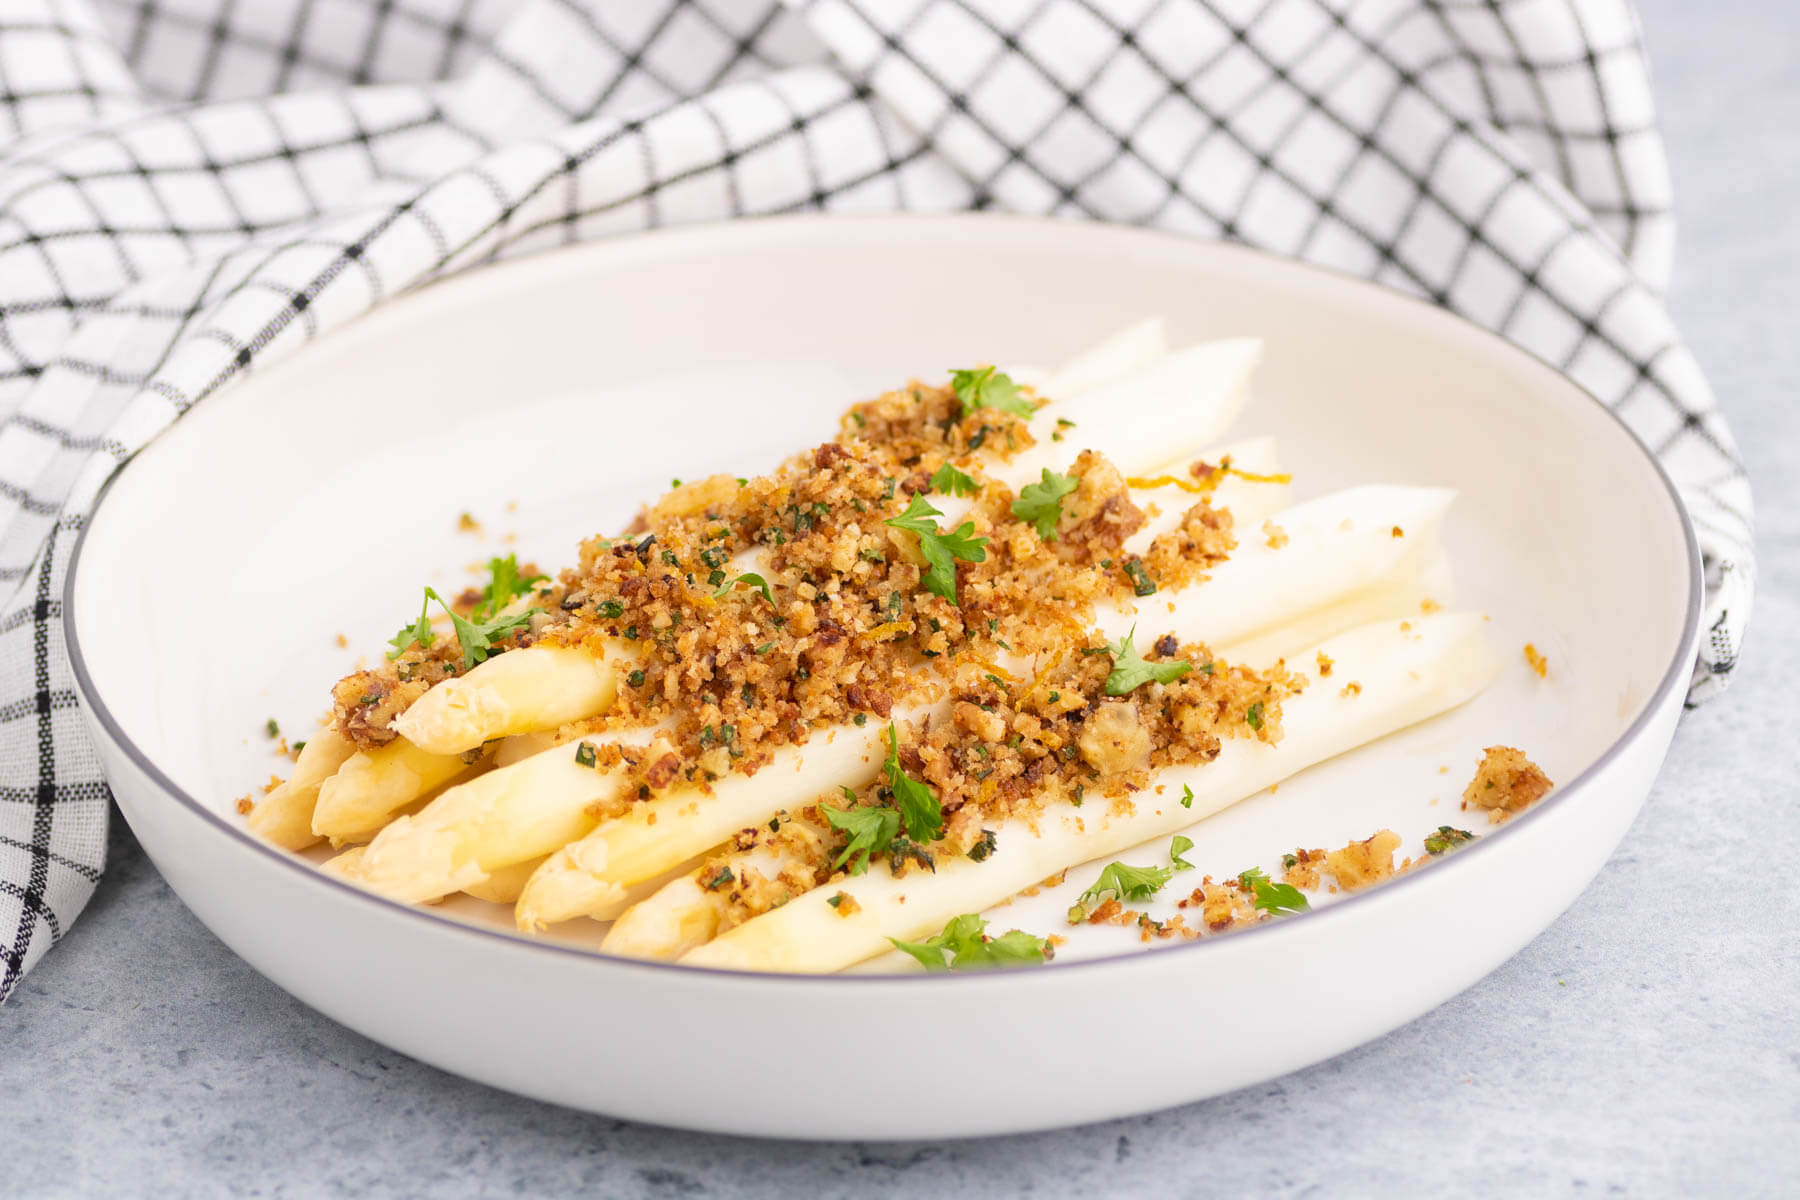 A plate of steamed white asparagus covered in golden pangrattato and herbs.